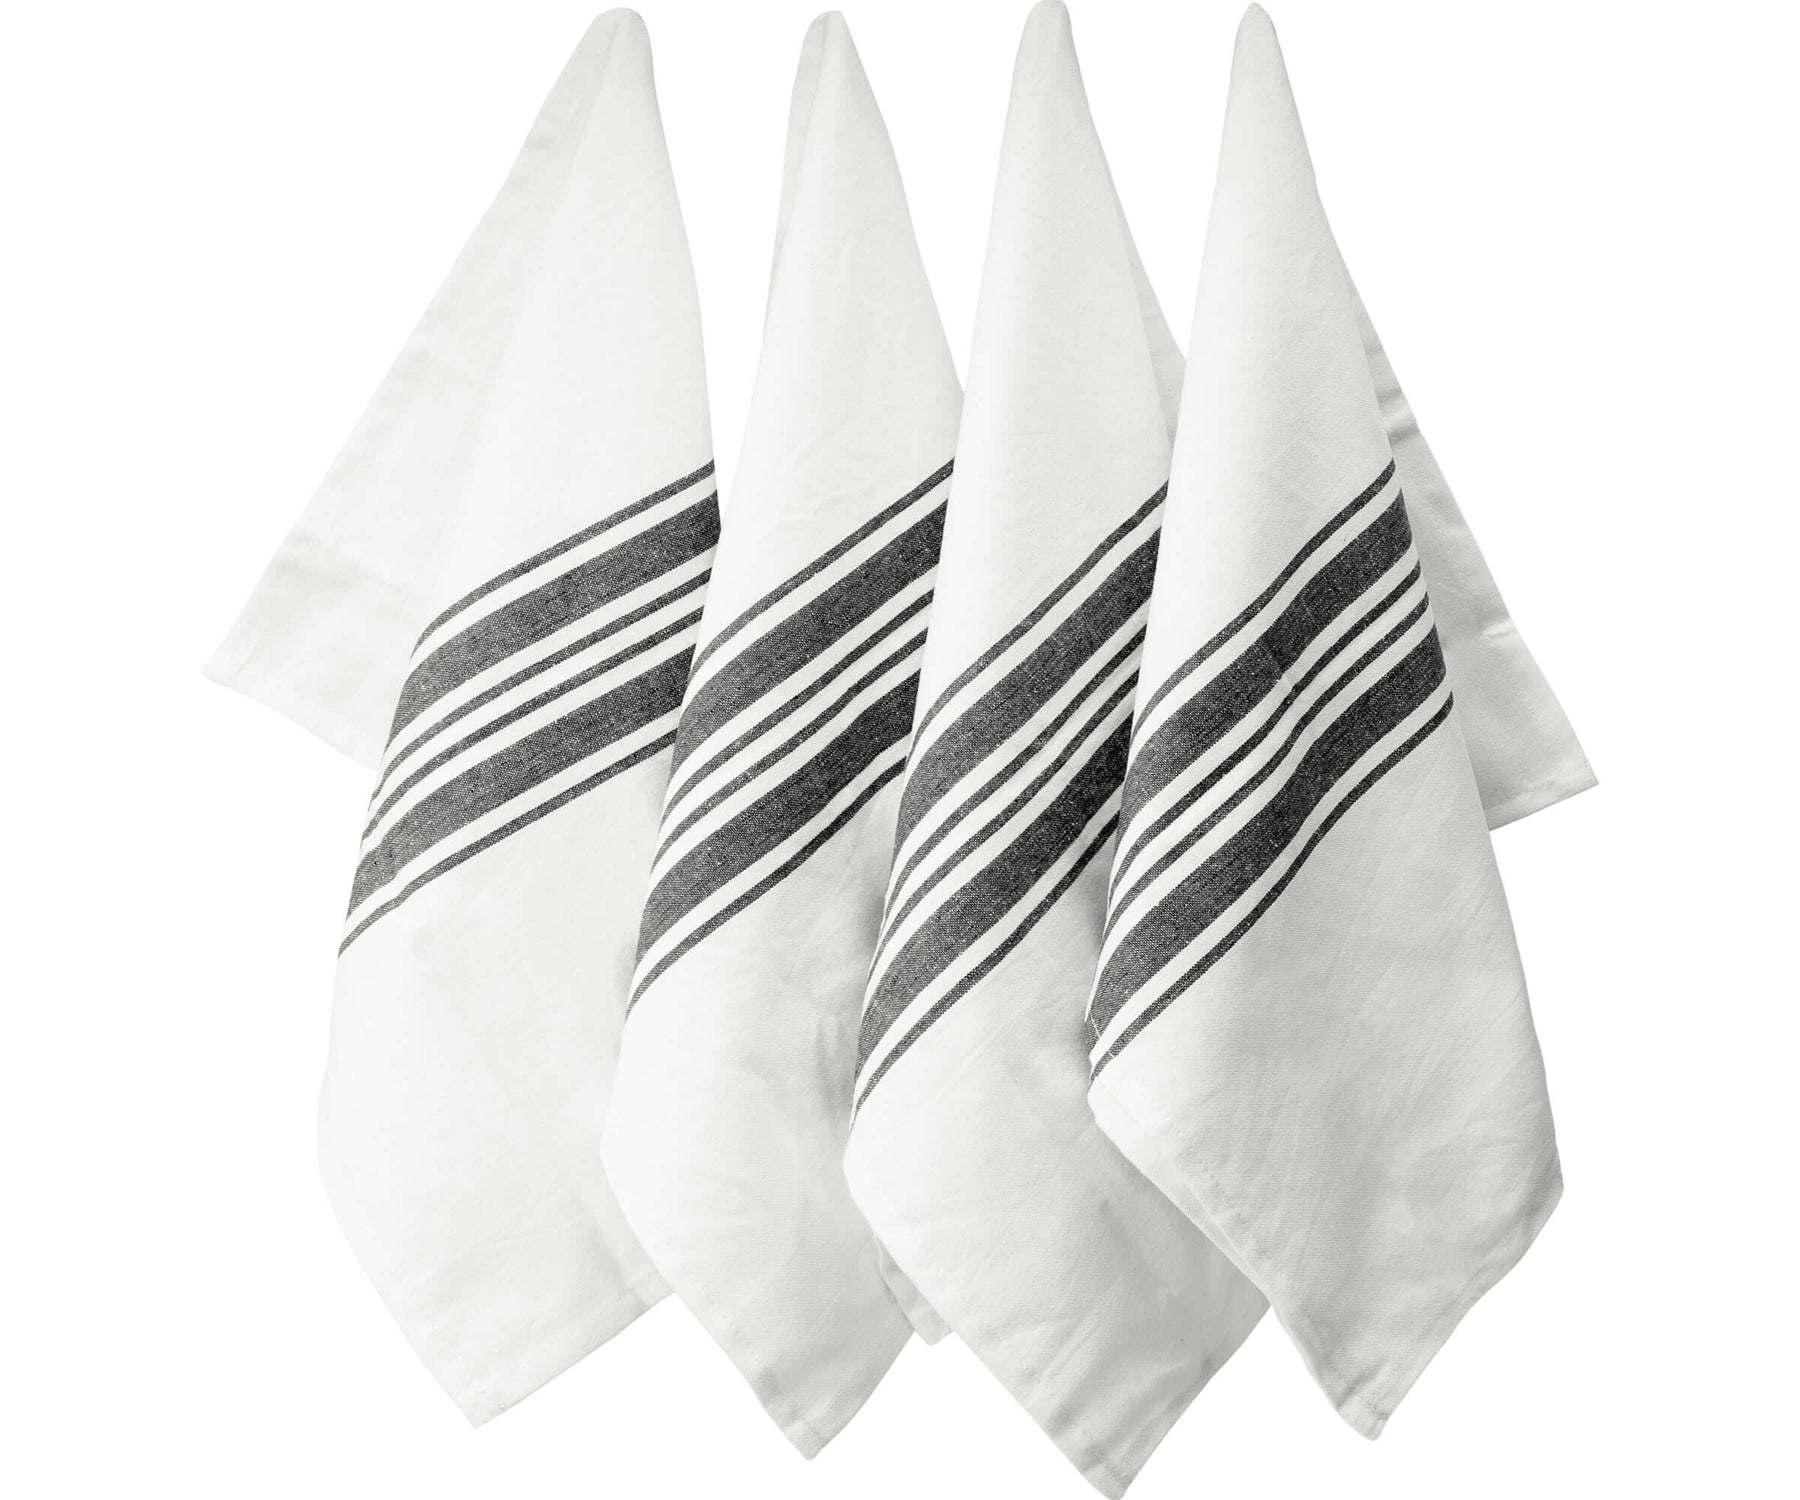 Four kitchen towels with a striking black stripe pattern on a white background